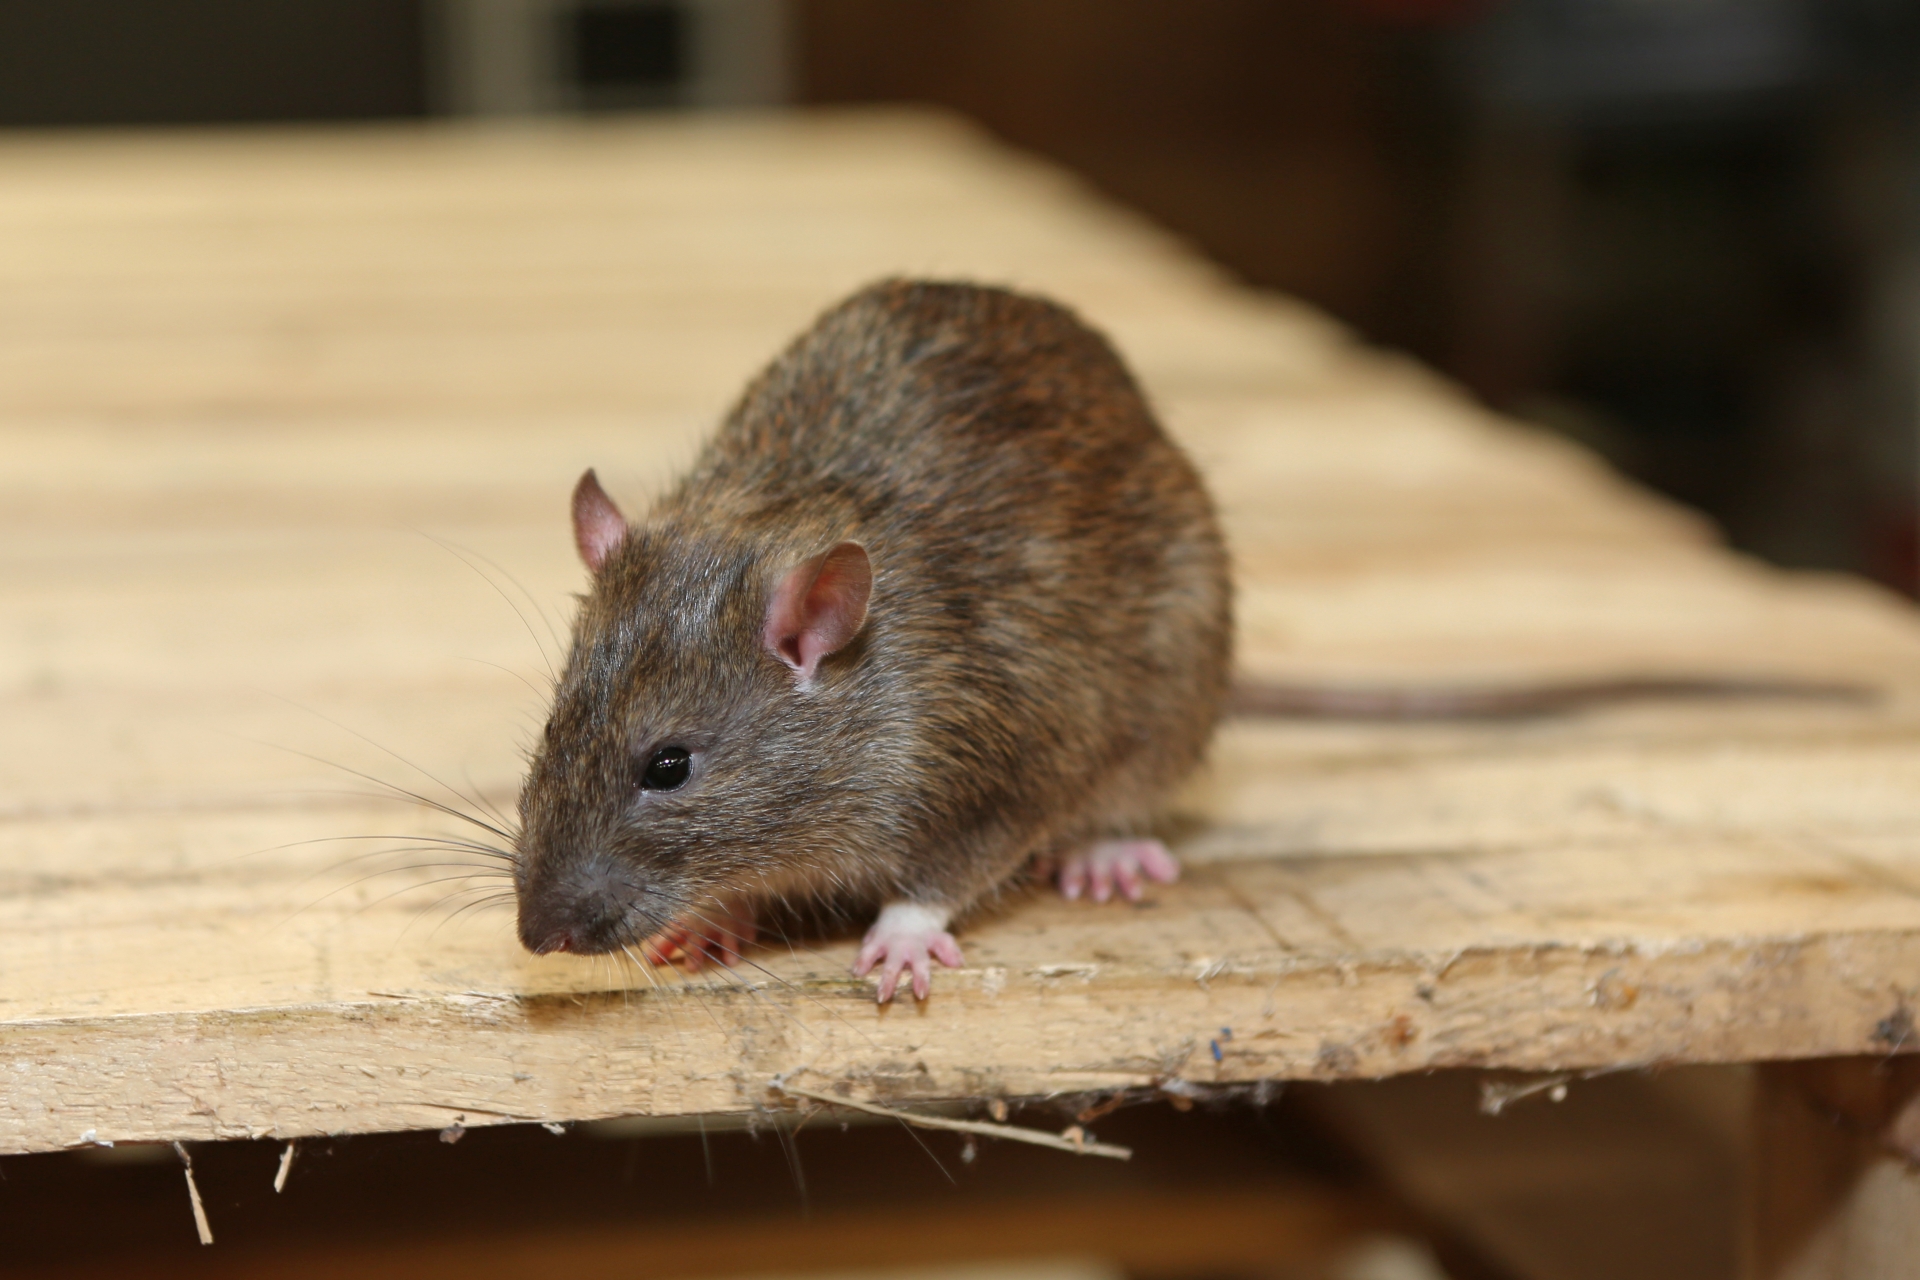 Rat extermination, Pest Control in Esher, Claygate, KT10. Call Now 020 8166 9746